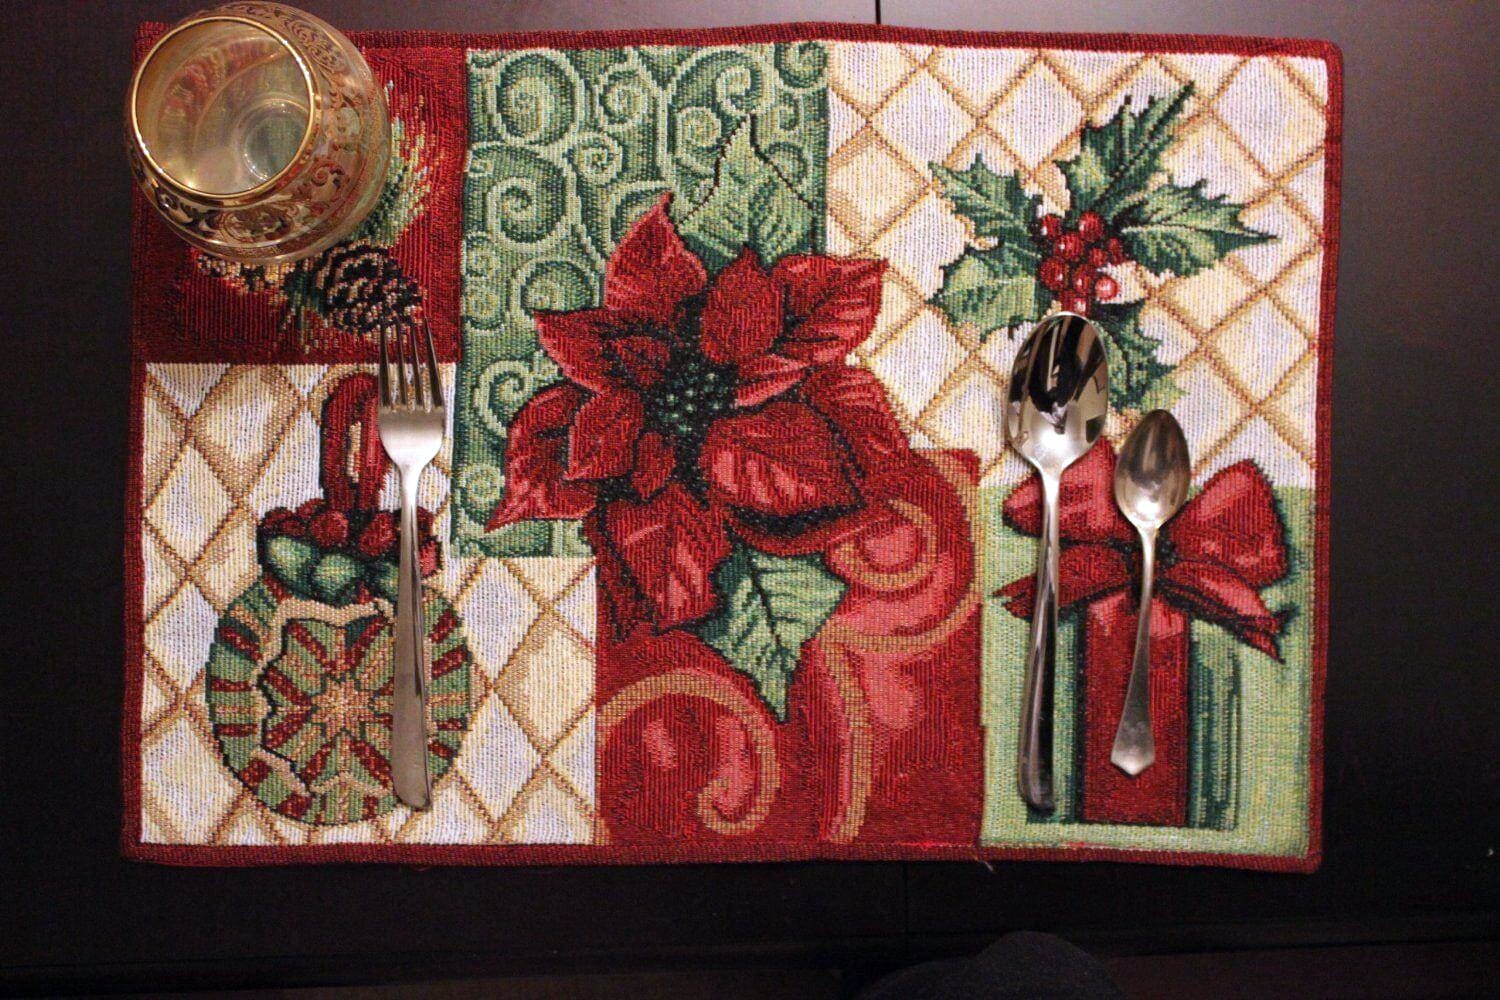 Tache Holiday Christmas Tidings Tapestry Placemat Set of 4 (12900PM) - Tache Home Fashion